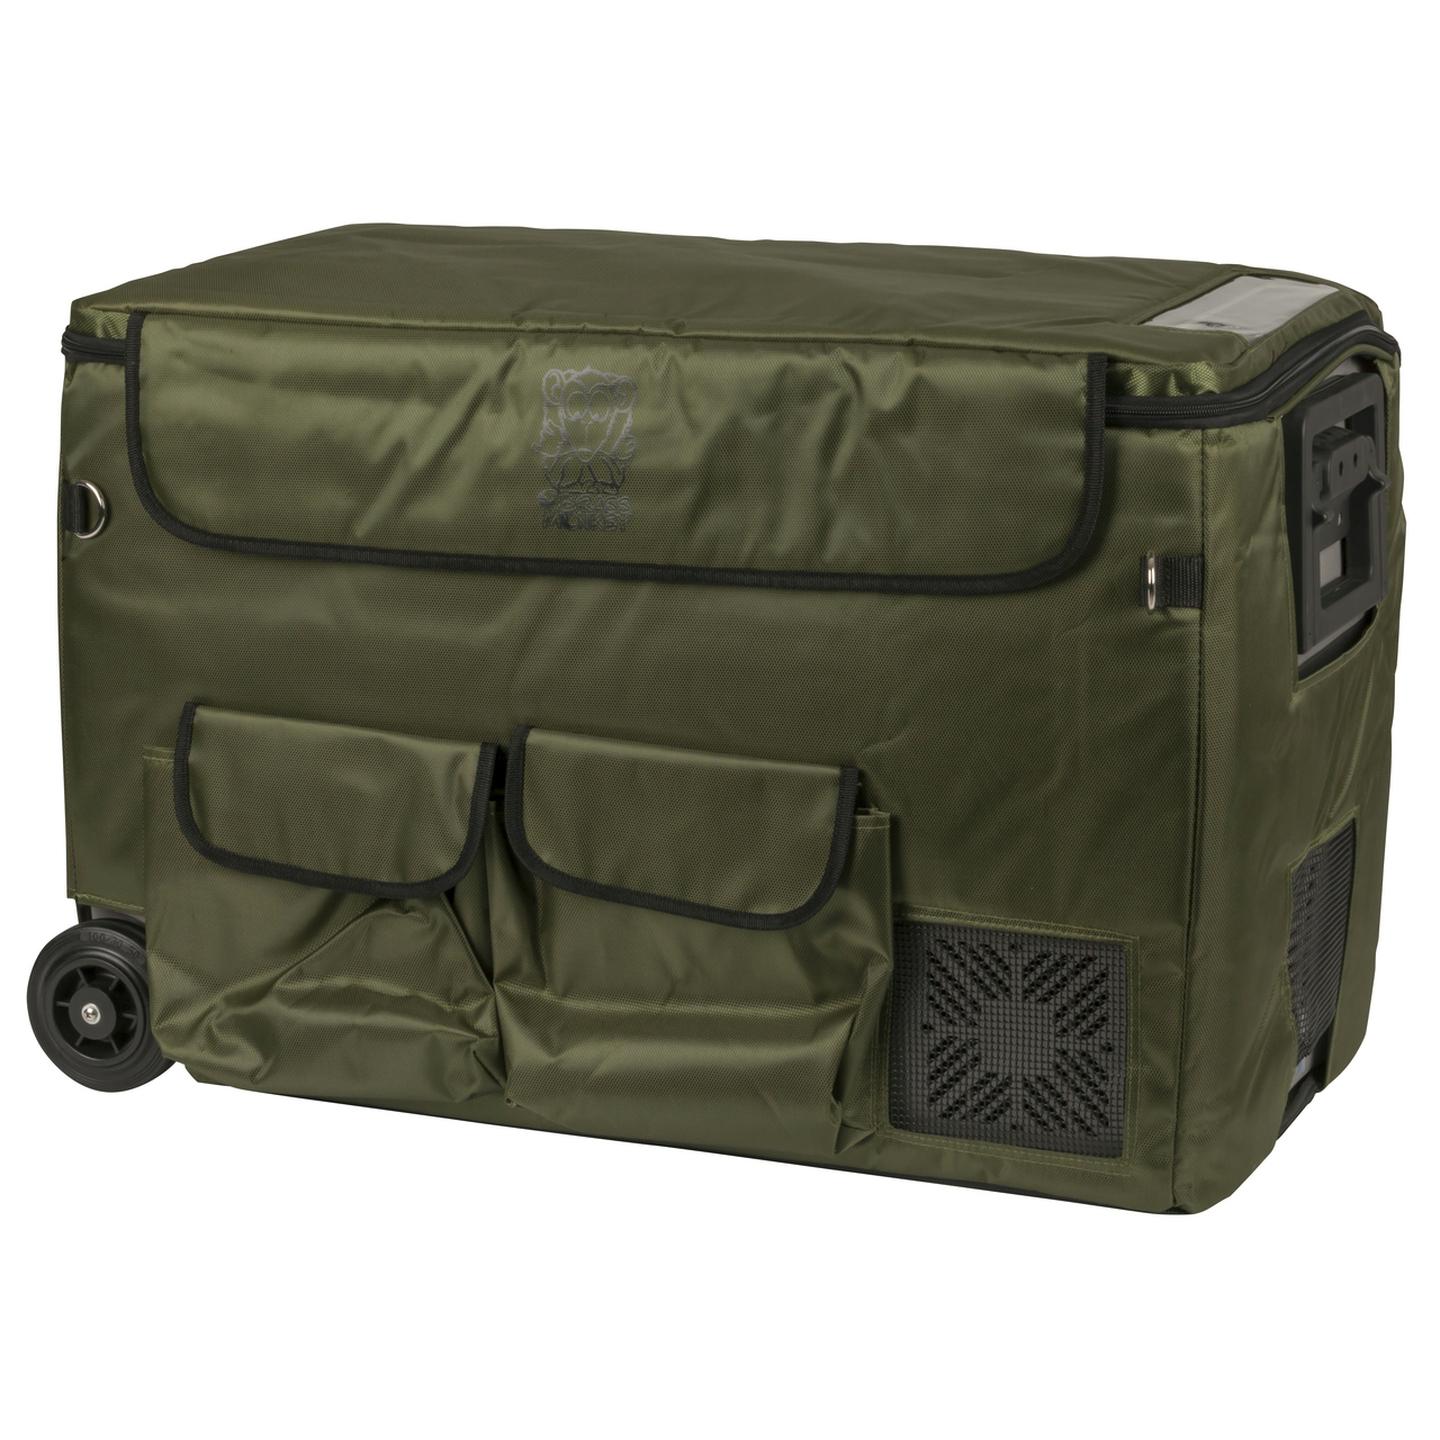 Green Insulated Cover for 36L Brass Monkey Portable Fridge/Freezer